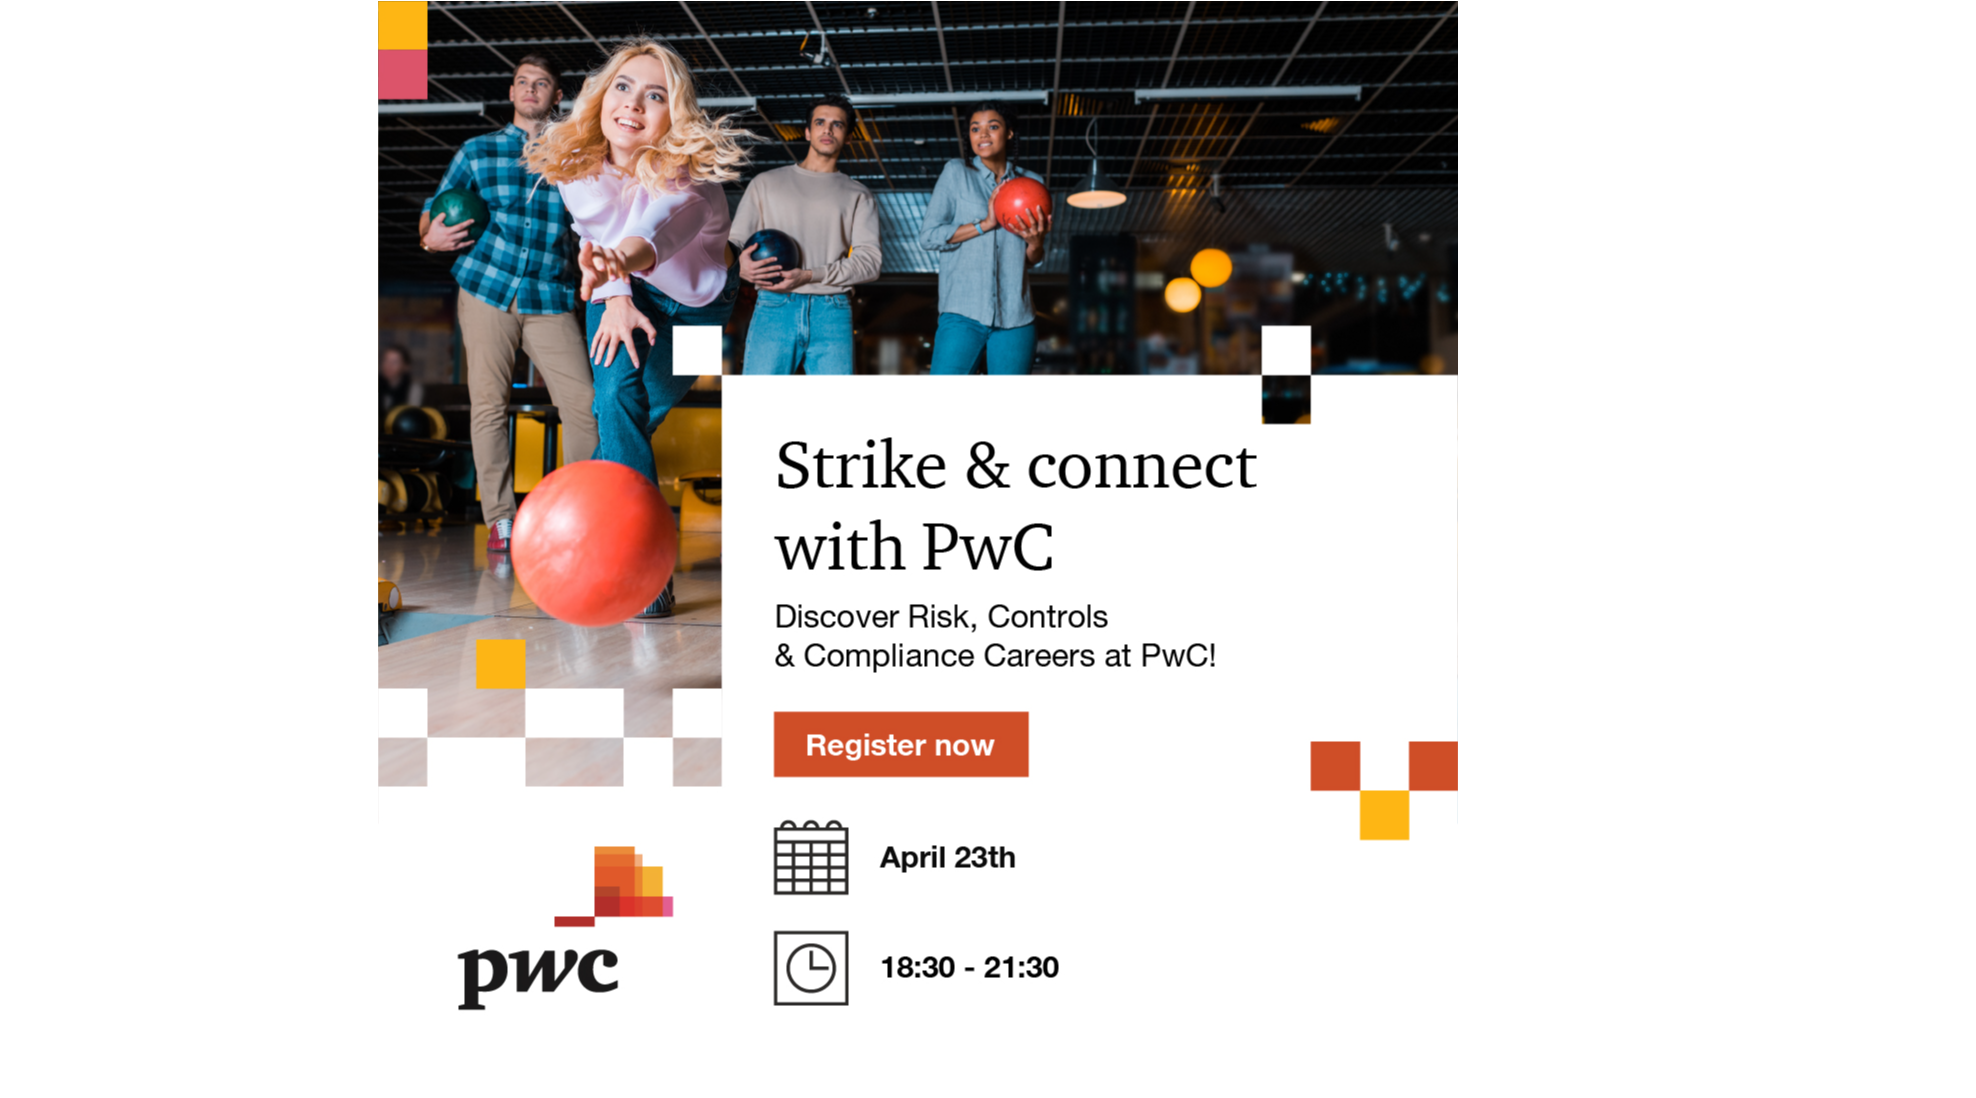 pwc-strike-and-connect-with-pwc